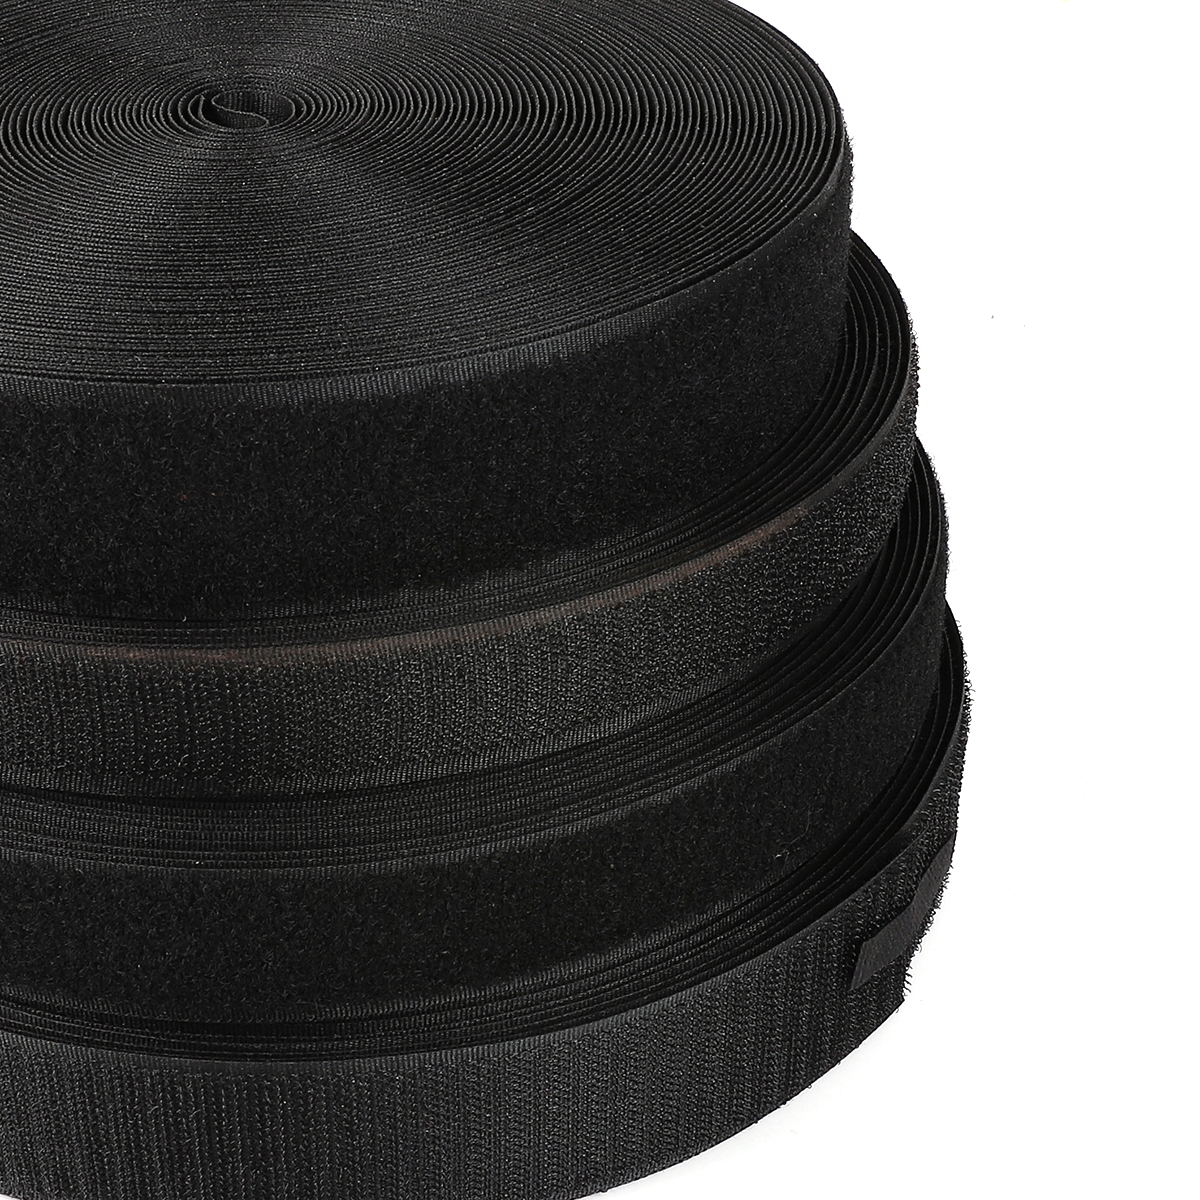 2M 16-40mm Black Not Adhesive Hook and Loop Fastener Tape Sticker Velcros Nylon Magic Tape for DIY Craft Supply Roll Sew On Tape